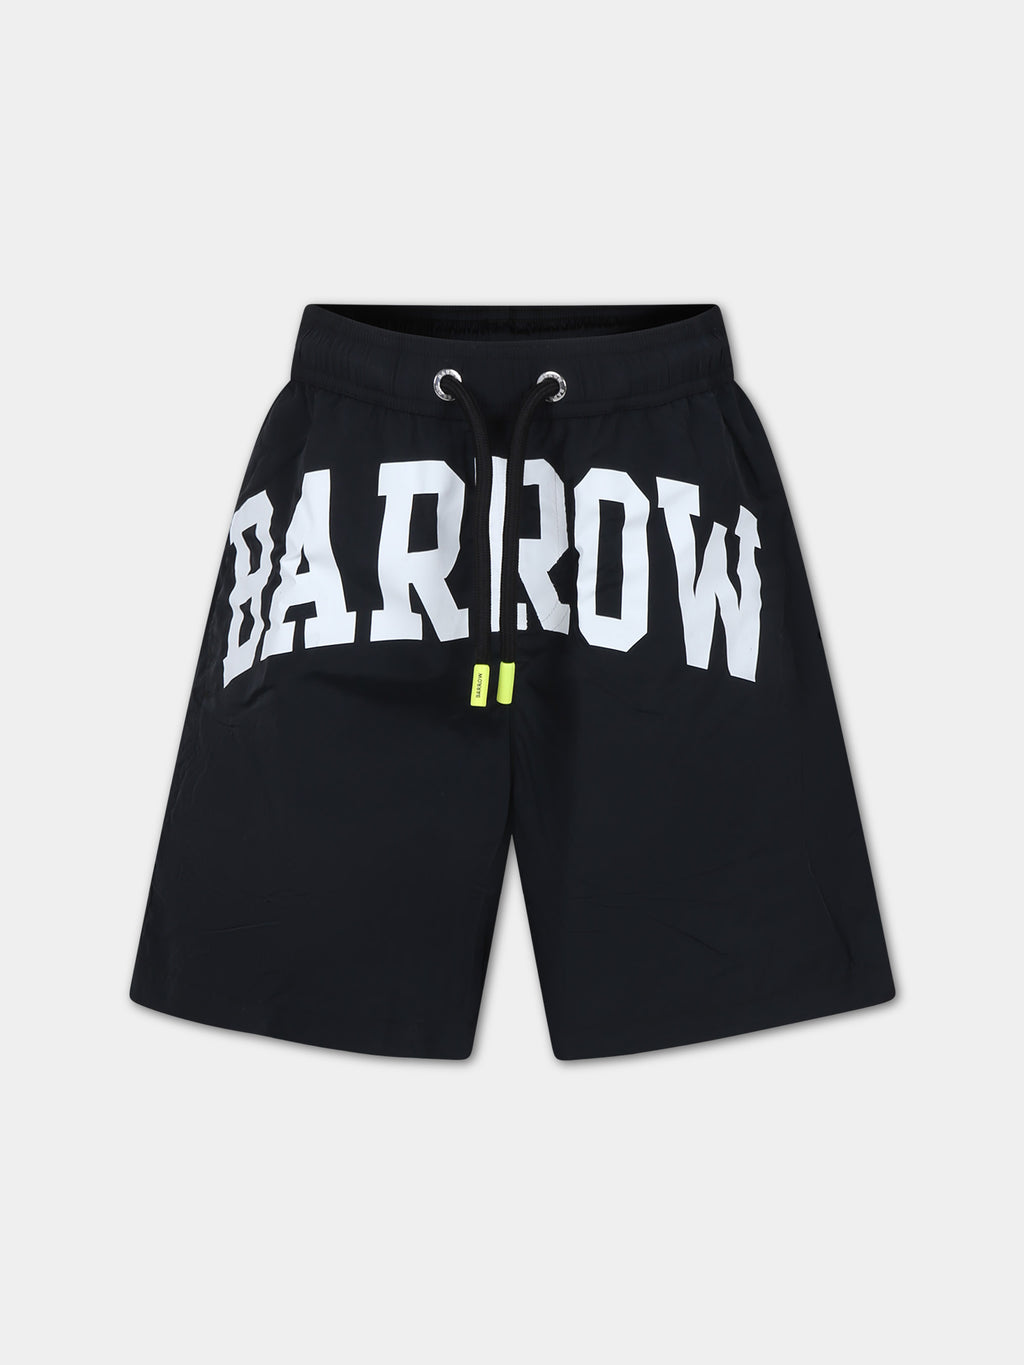 Black swim shorts for boy with smiley